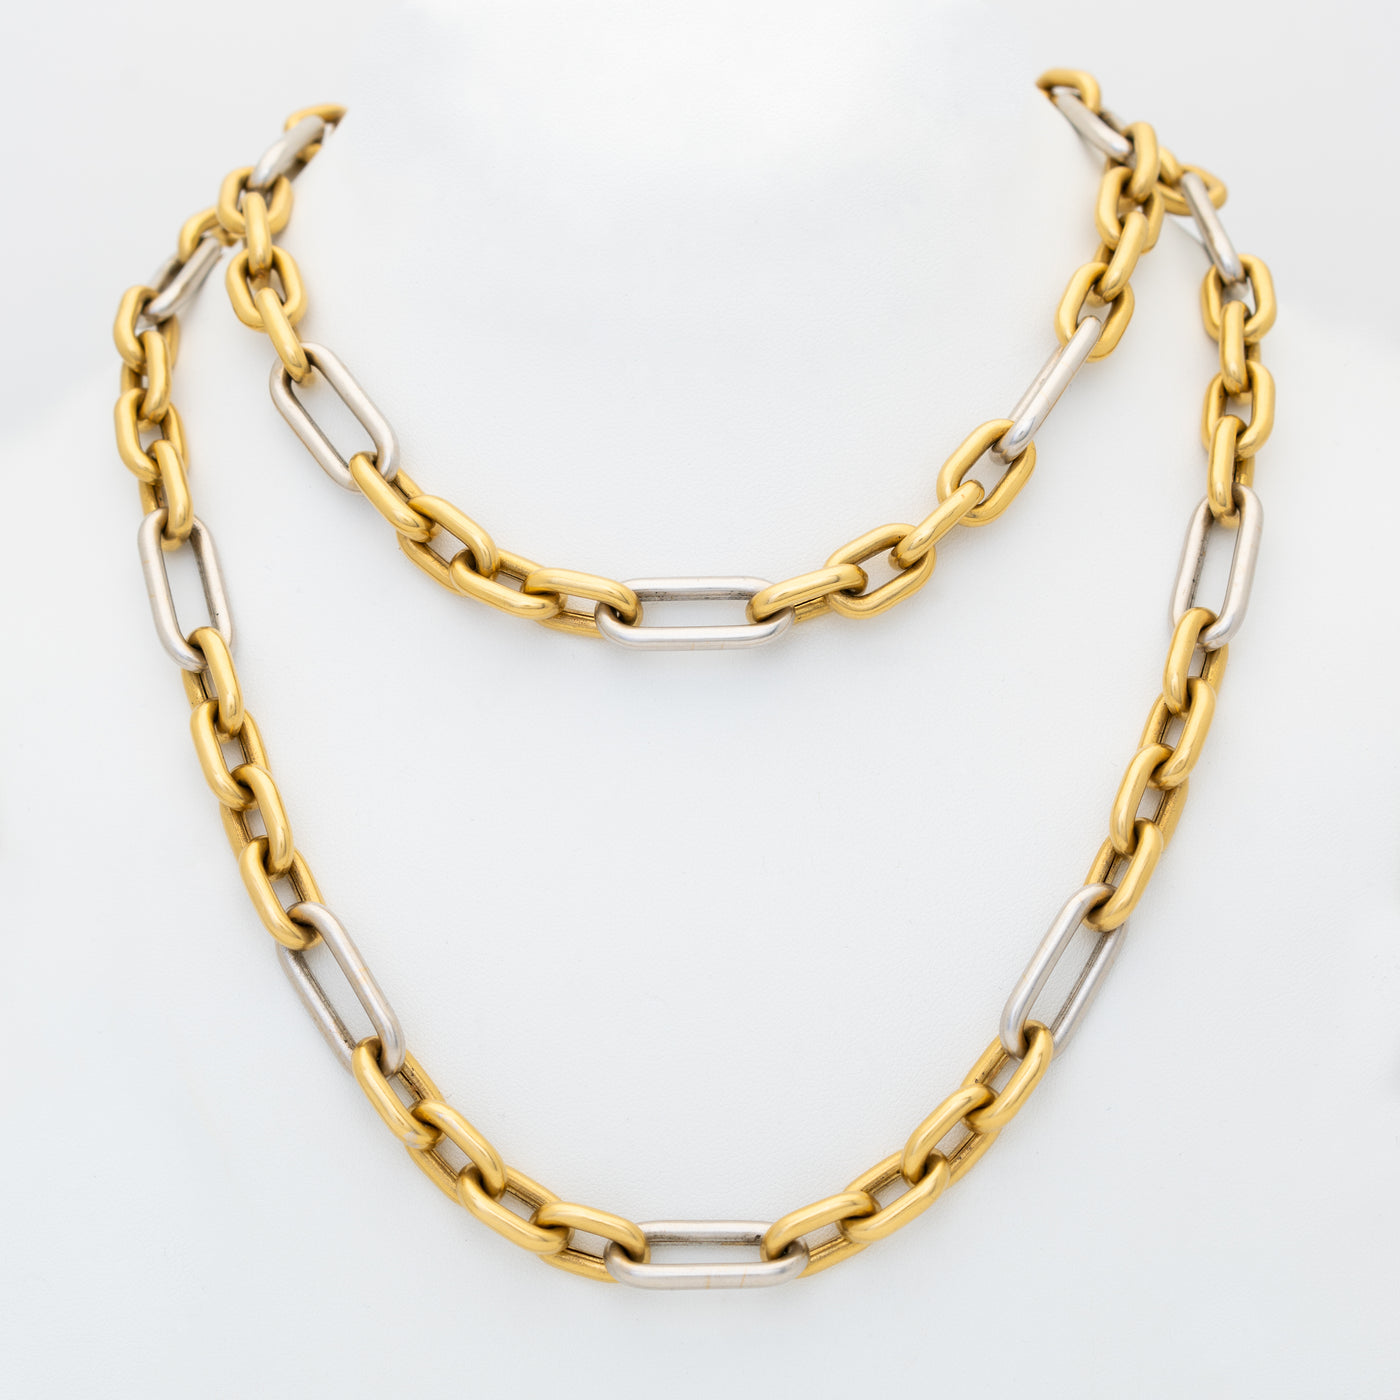 VINTAGE 18K YELLOW AND WHITE GOLD LONG CHAIN c.1980s